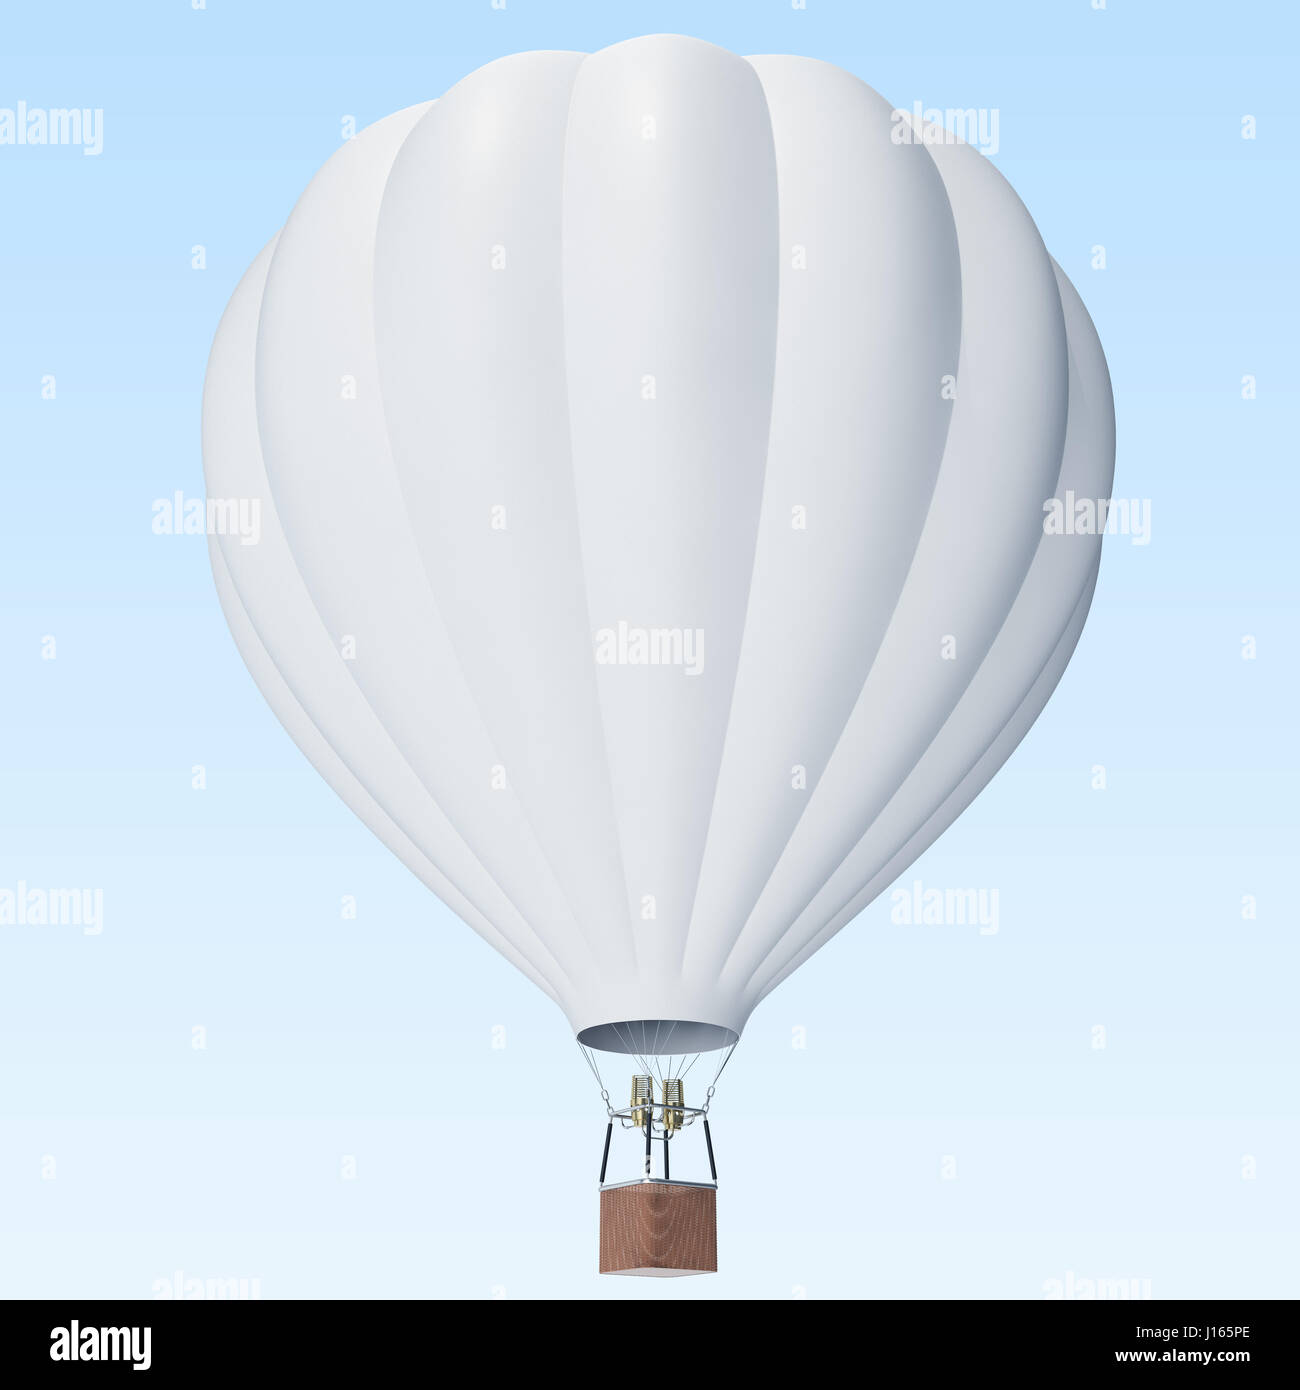 White hot air balloon on clouds background with basket. 3d rendering Stock Photo